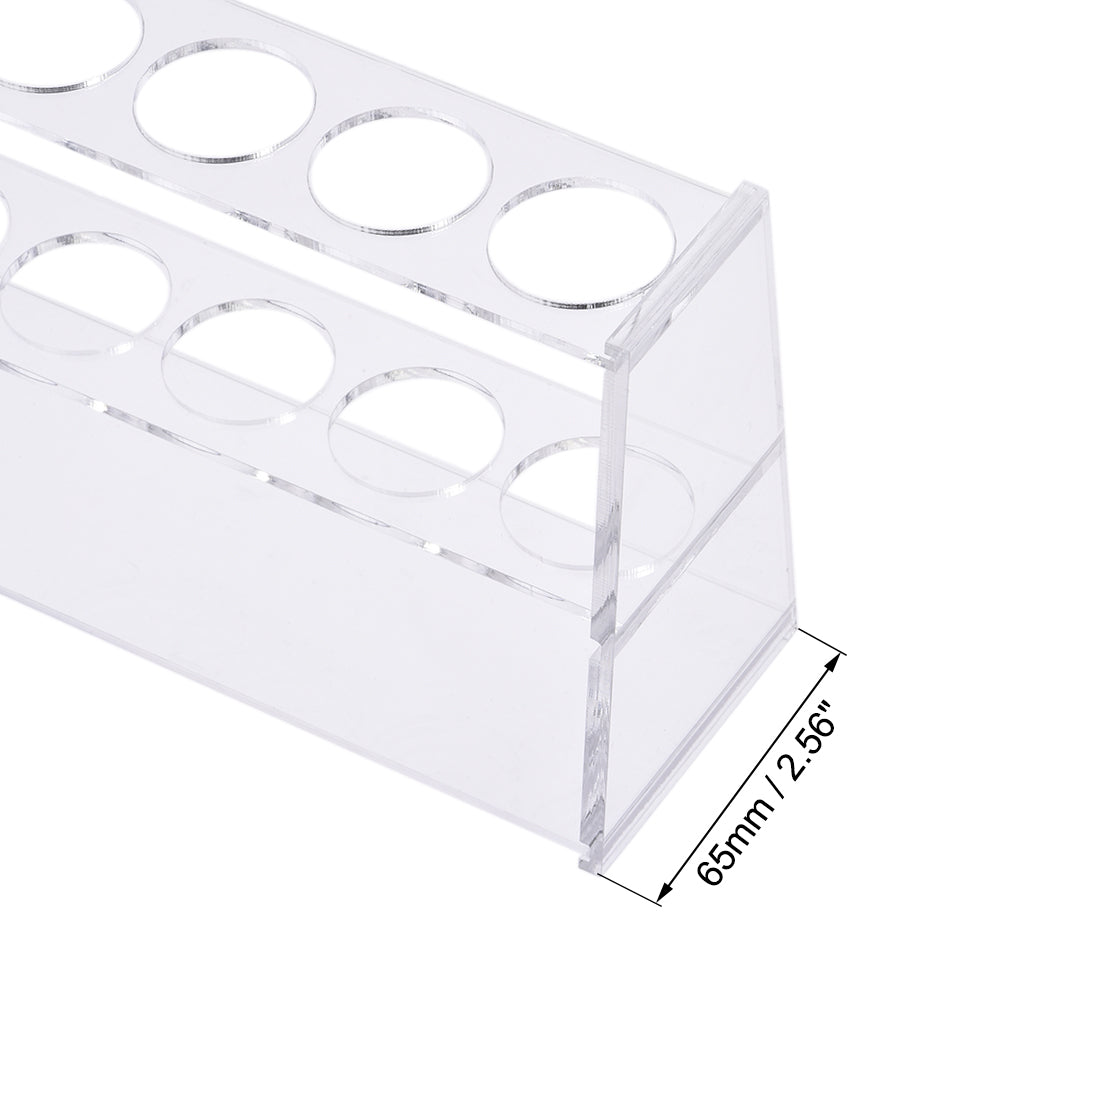 uxcell Uxcell Acrylic Test Tube Holder Rack 6 Wells for 100ml Centrifuge Tubes Clear